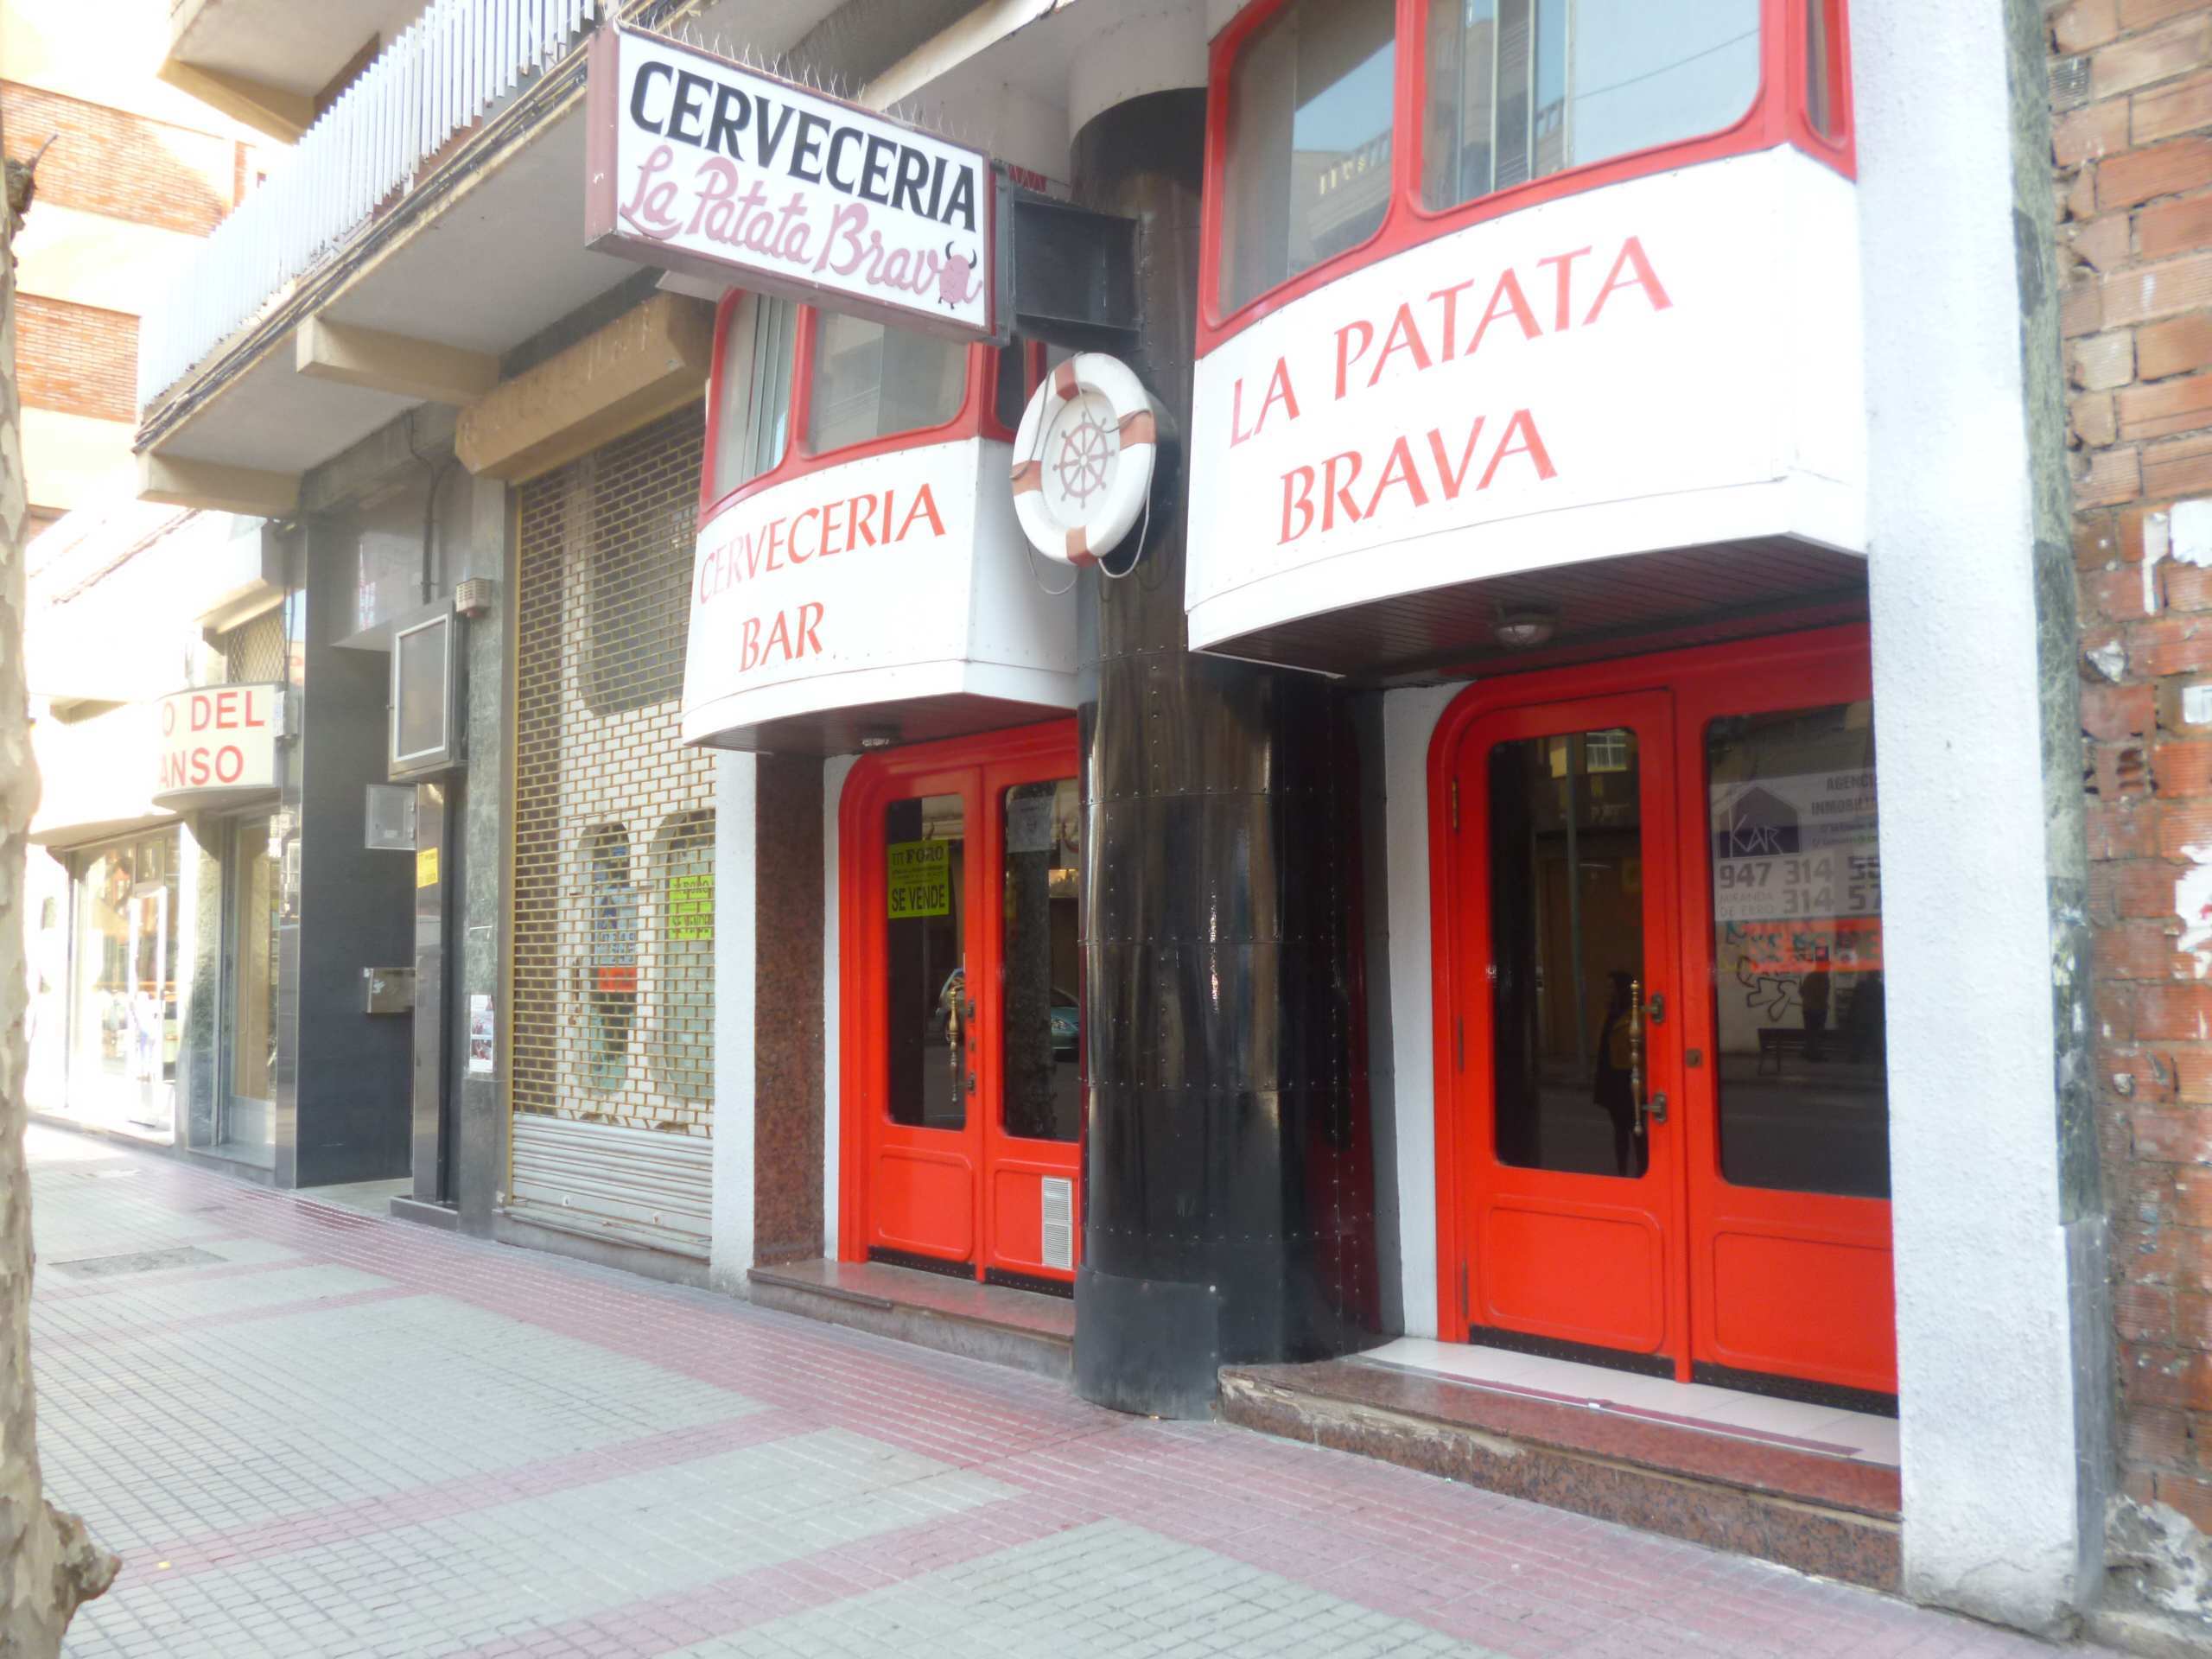 Local for sale in the city center